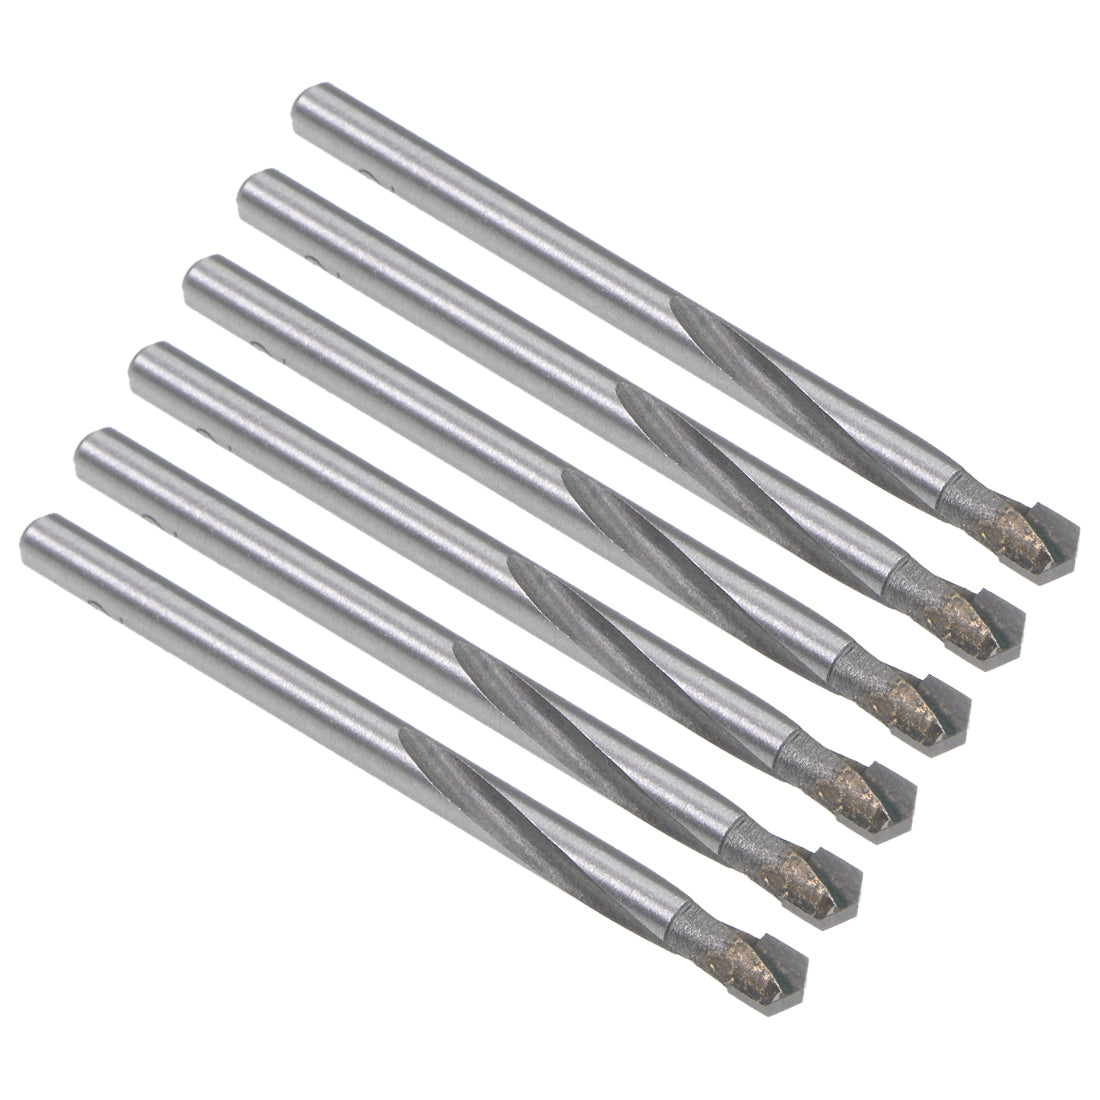 uxcell Uxcell 4.2mm Cemented Carbide Twist Drill Bits for Stainless Steel Copper Aluminum 6Pcs